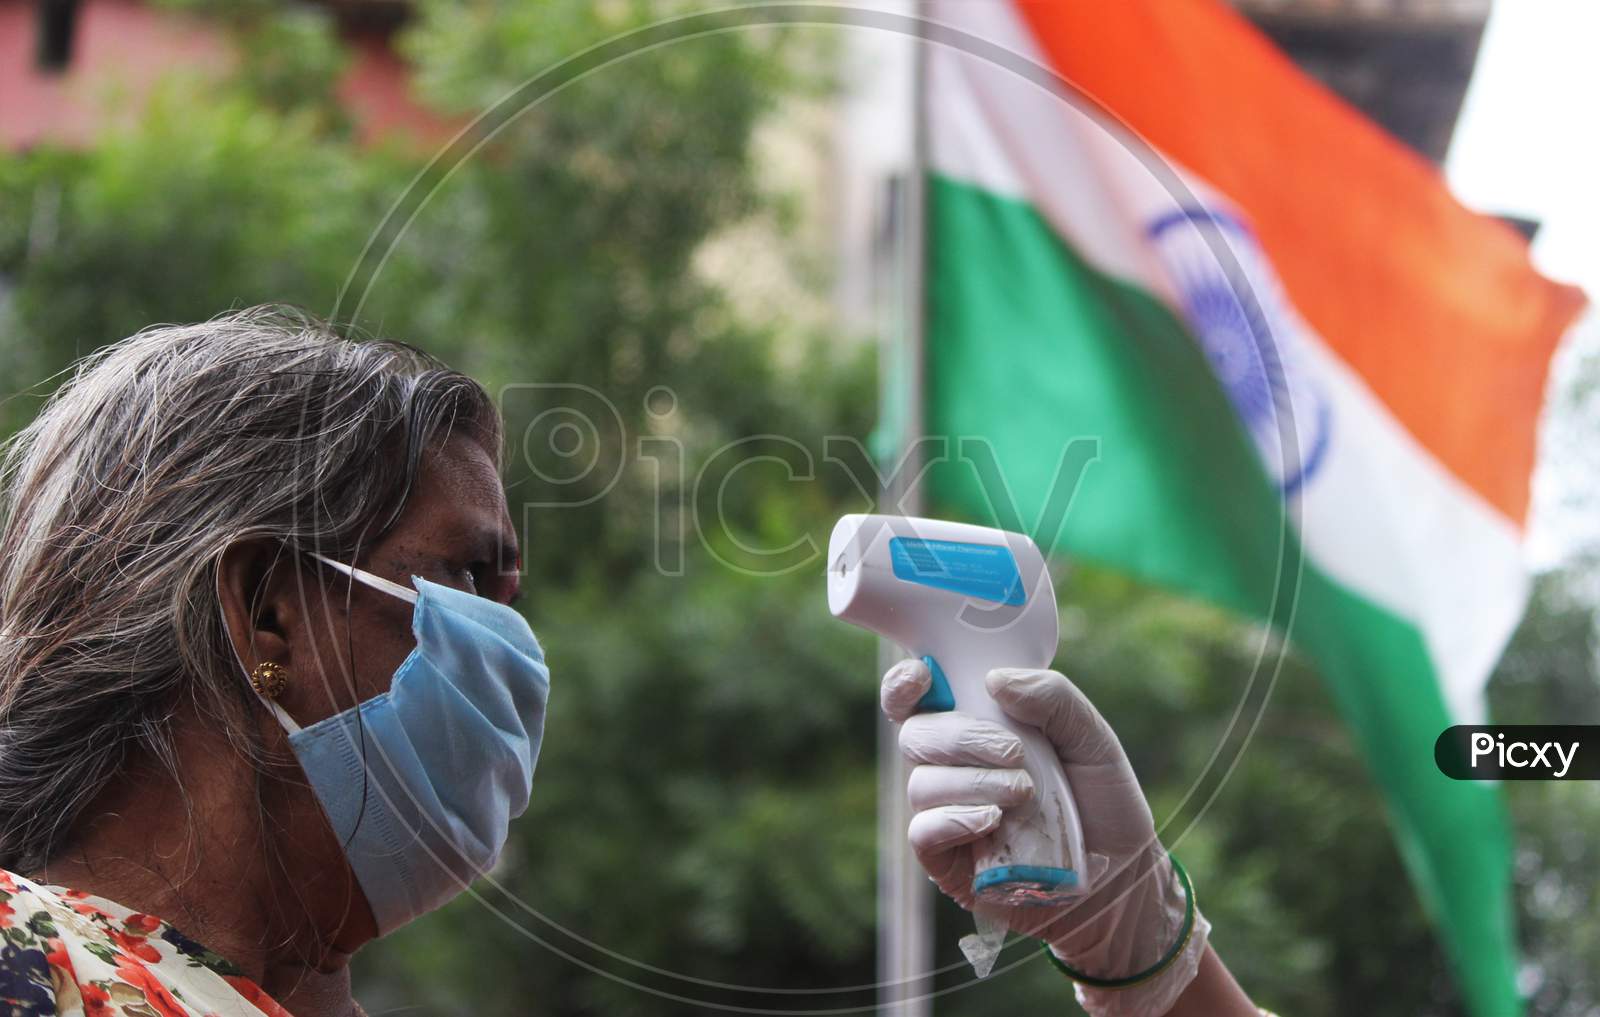 A healthcare worker checks the temperature of a resident during a check up camp for the coronavirus disease (COVID-19) , with the Indian Flag in the background, in Mumbai, India on August 15, 2020.